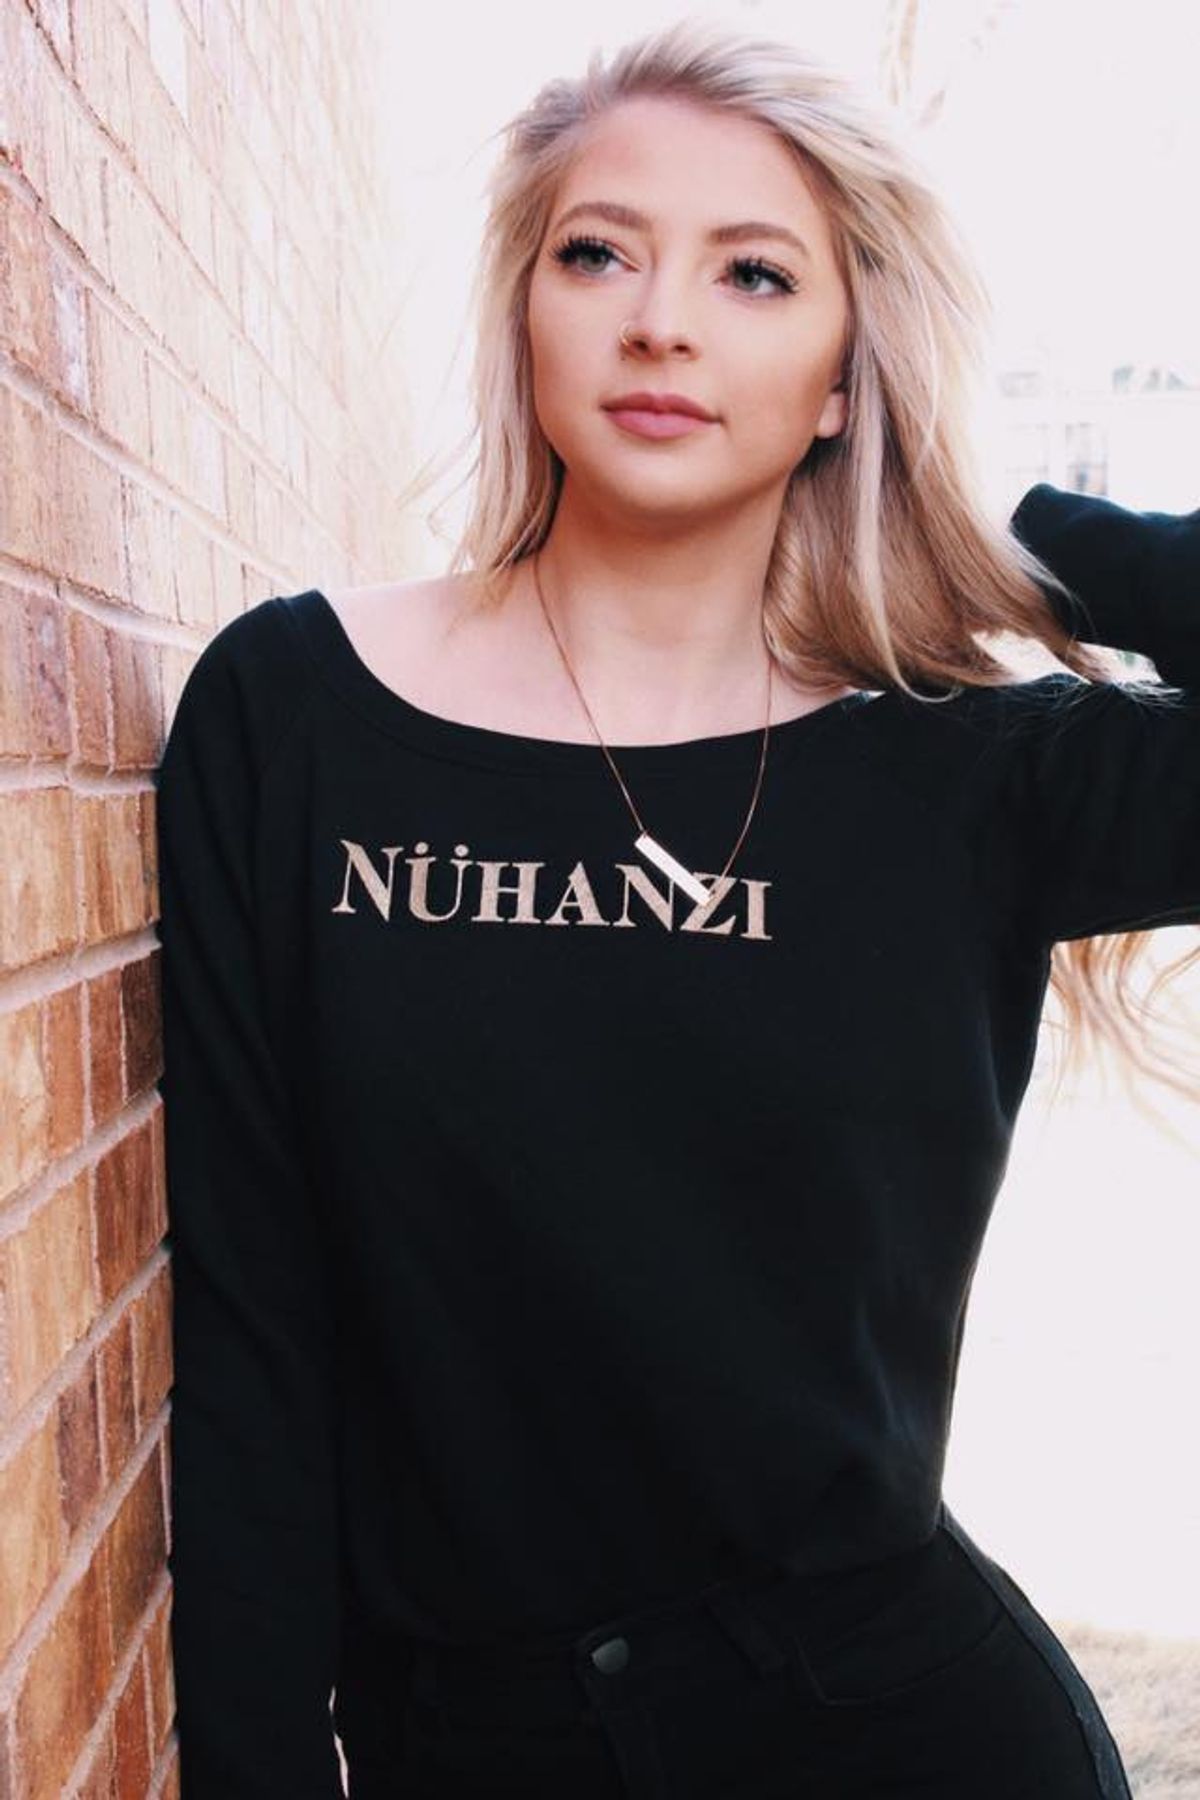 Why Women All Over The World Are Calling Themselves 'Nühanzi'